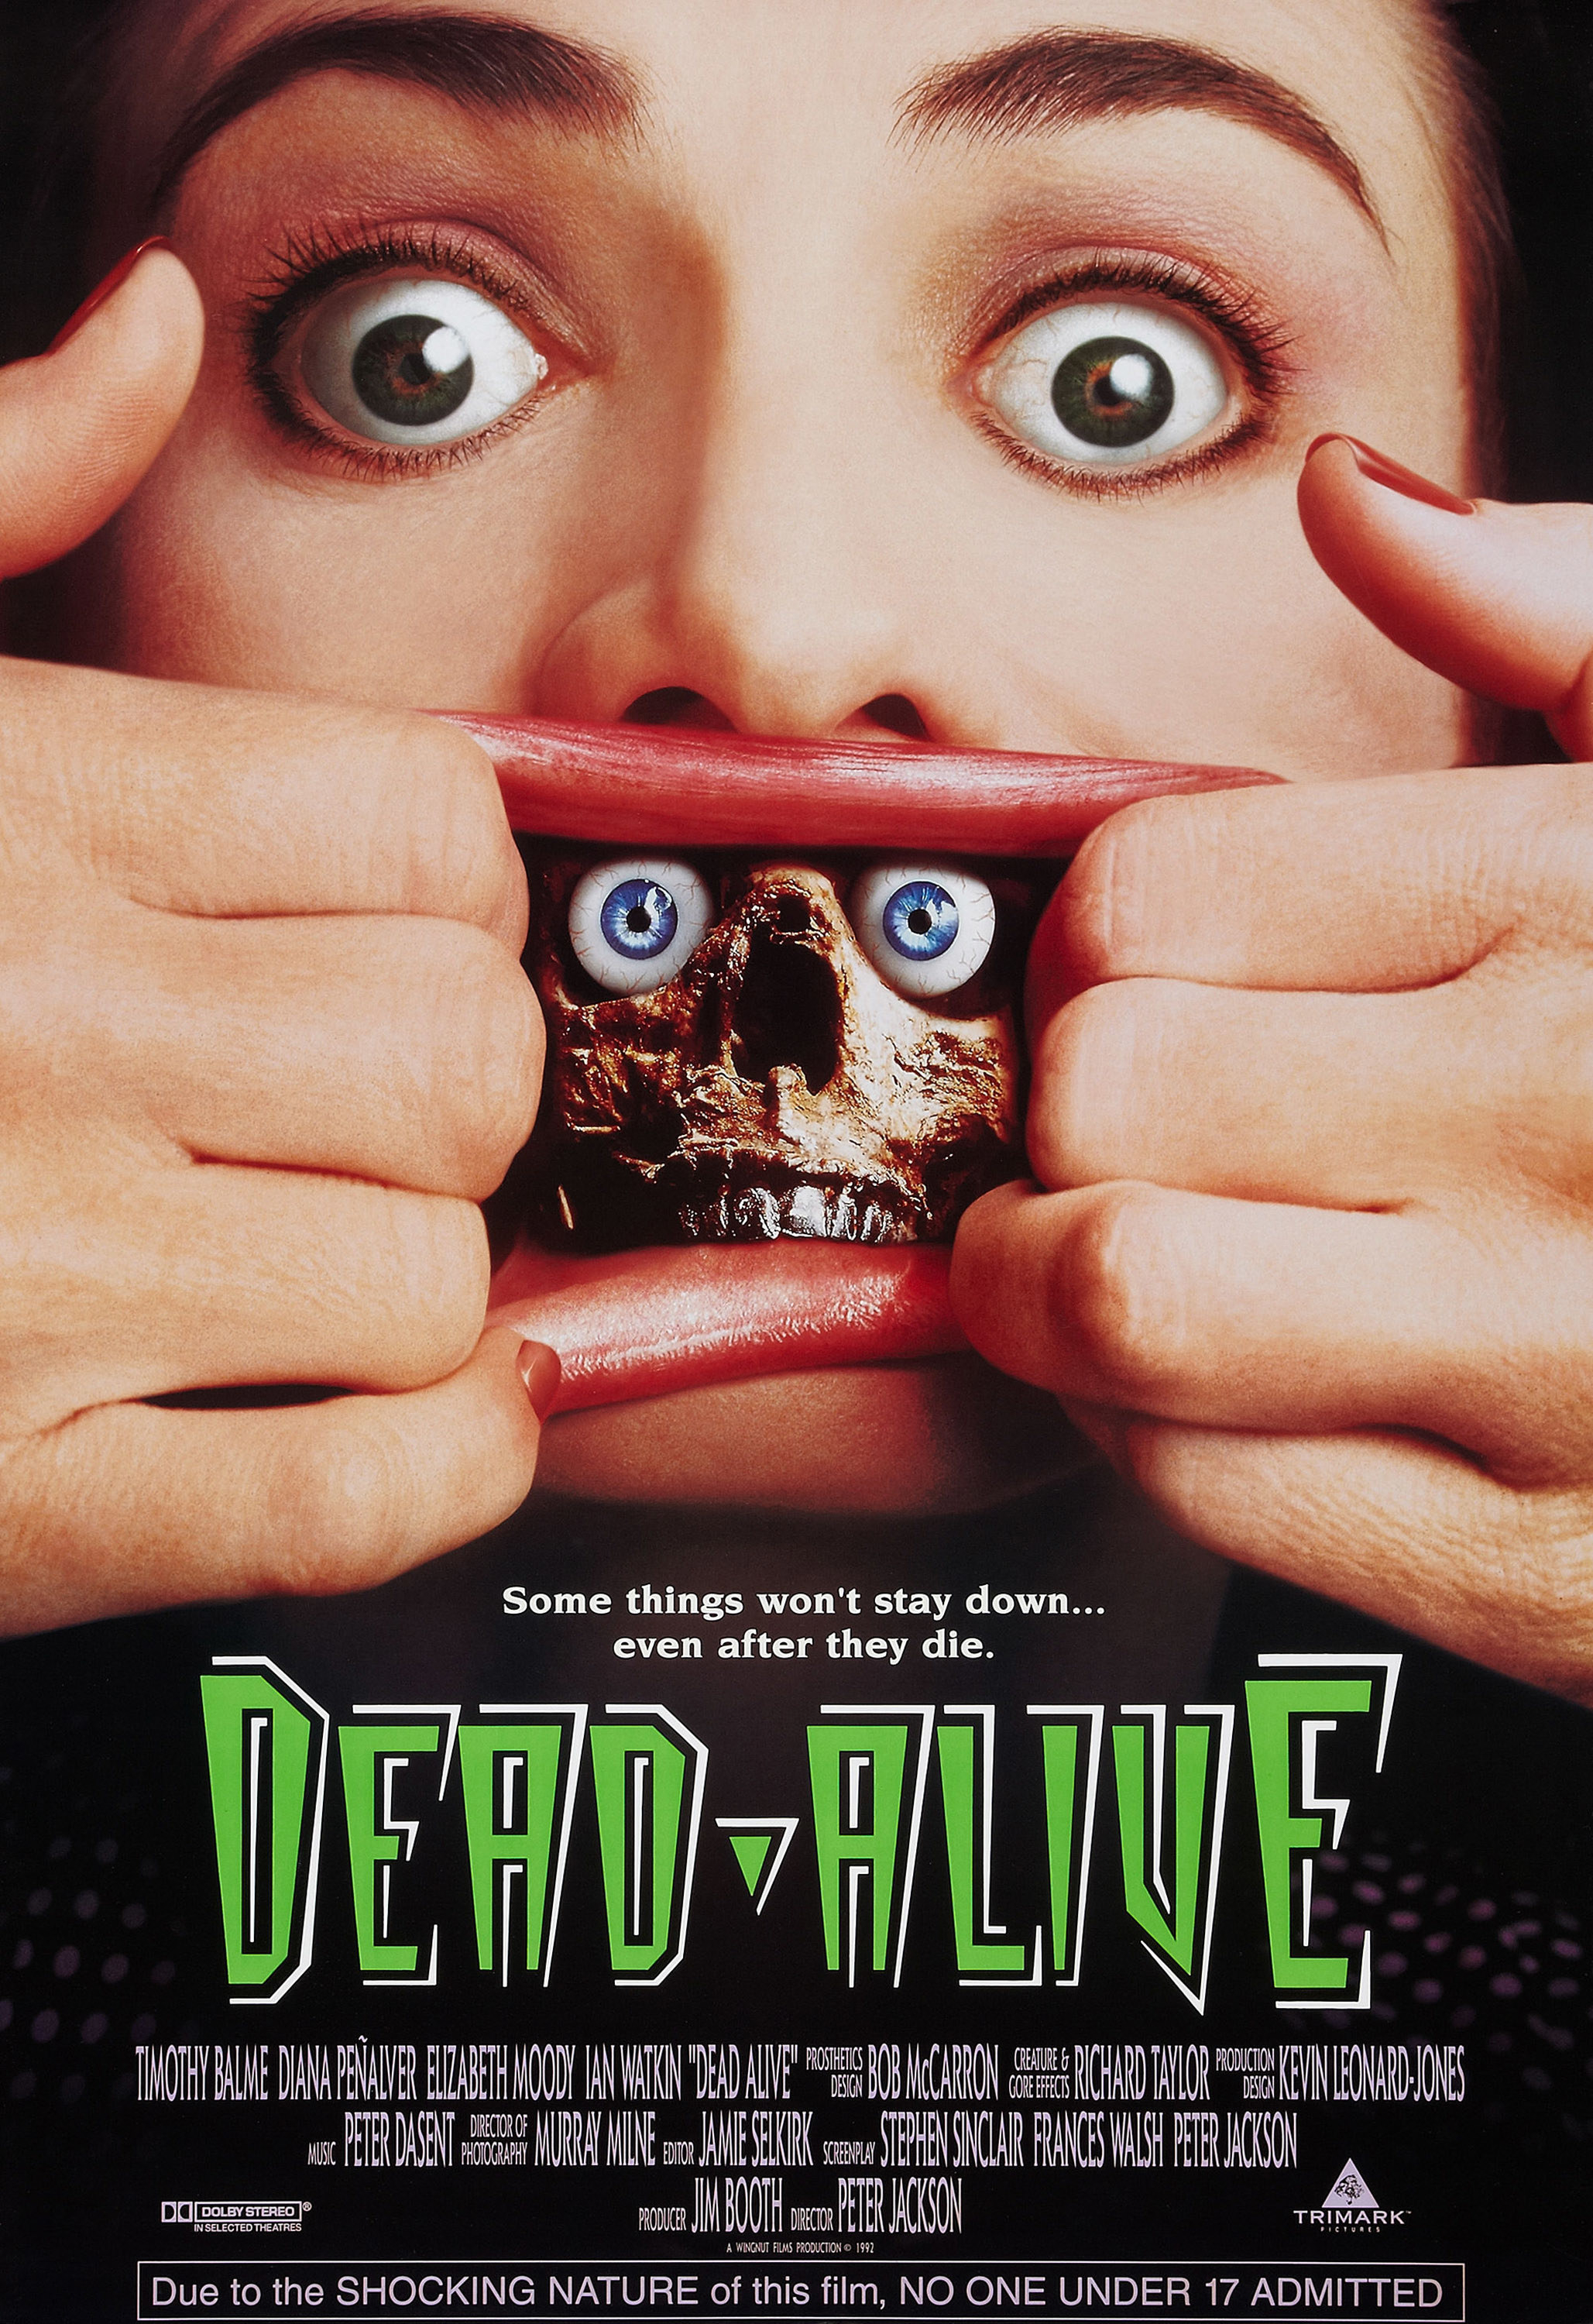 The &quot;Dead-Alive&quot; official poster featuring a woman opening her own lips wide using her hands to reveal a horrifying skeleton inside